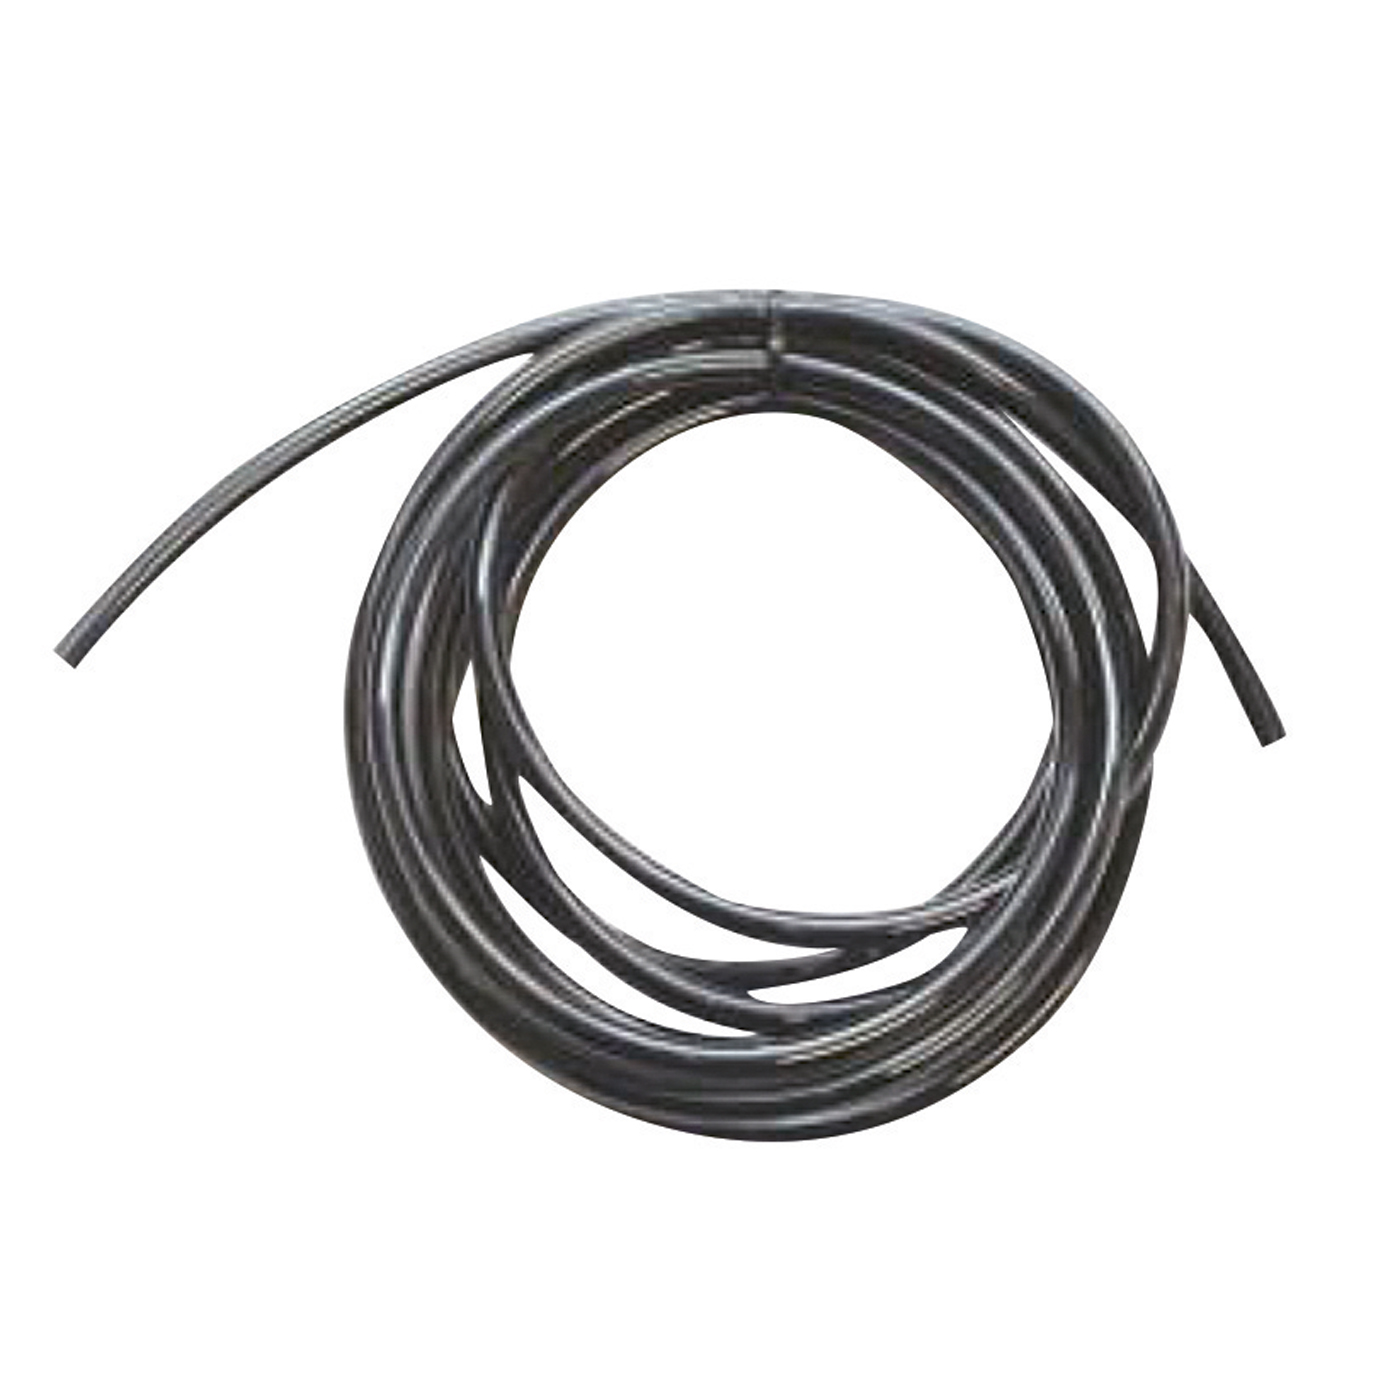 Gas Hose, ø 6.0 mm, Black, by the Meter, for PUK D3 - 1 m